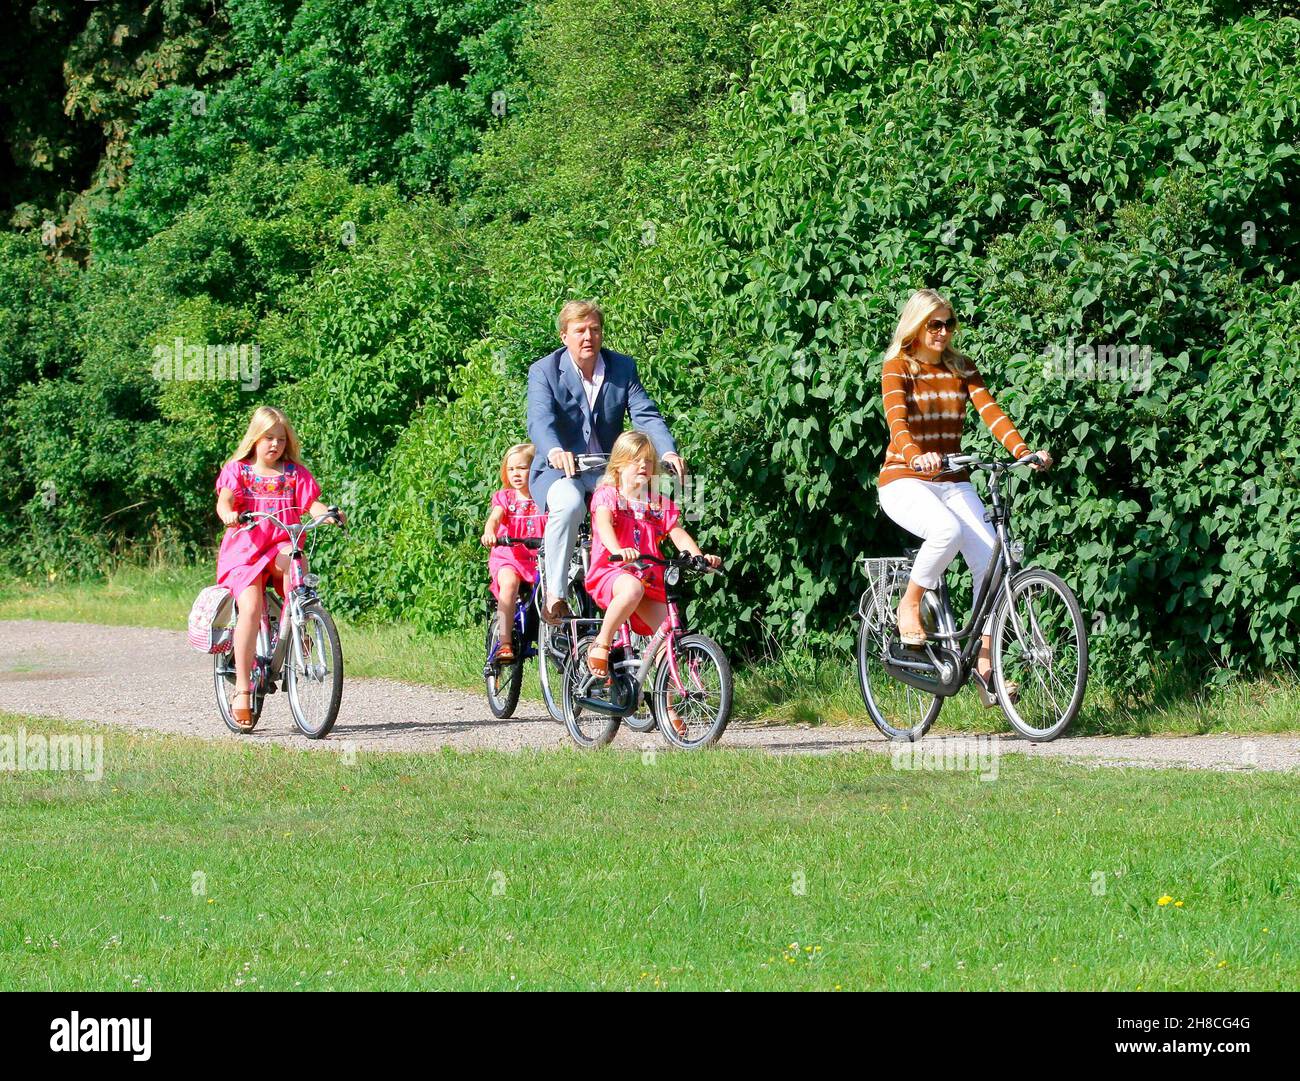 Fahrrad Fahren High Resolution Stock Photography and Images - Alamy